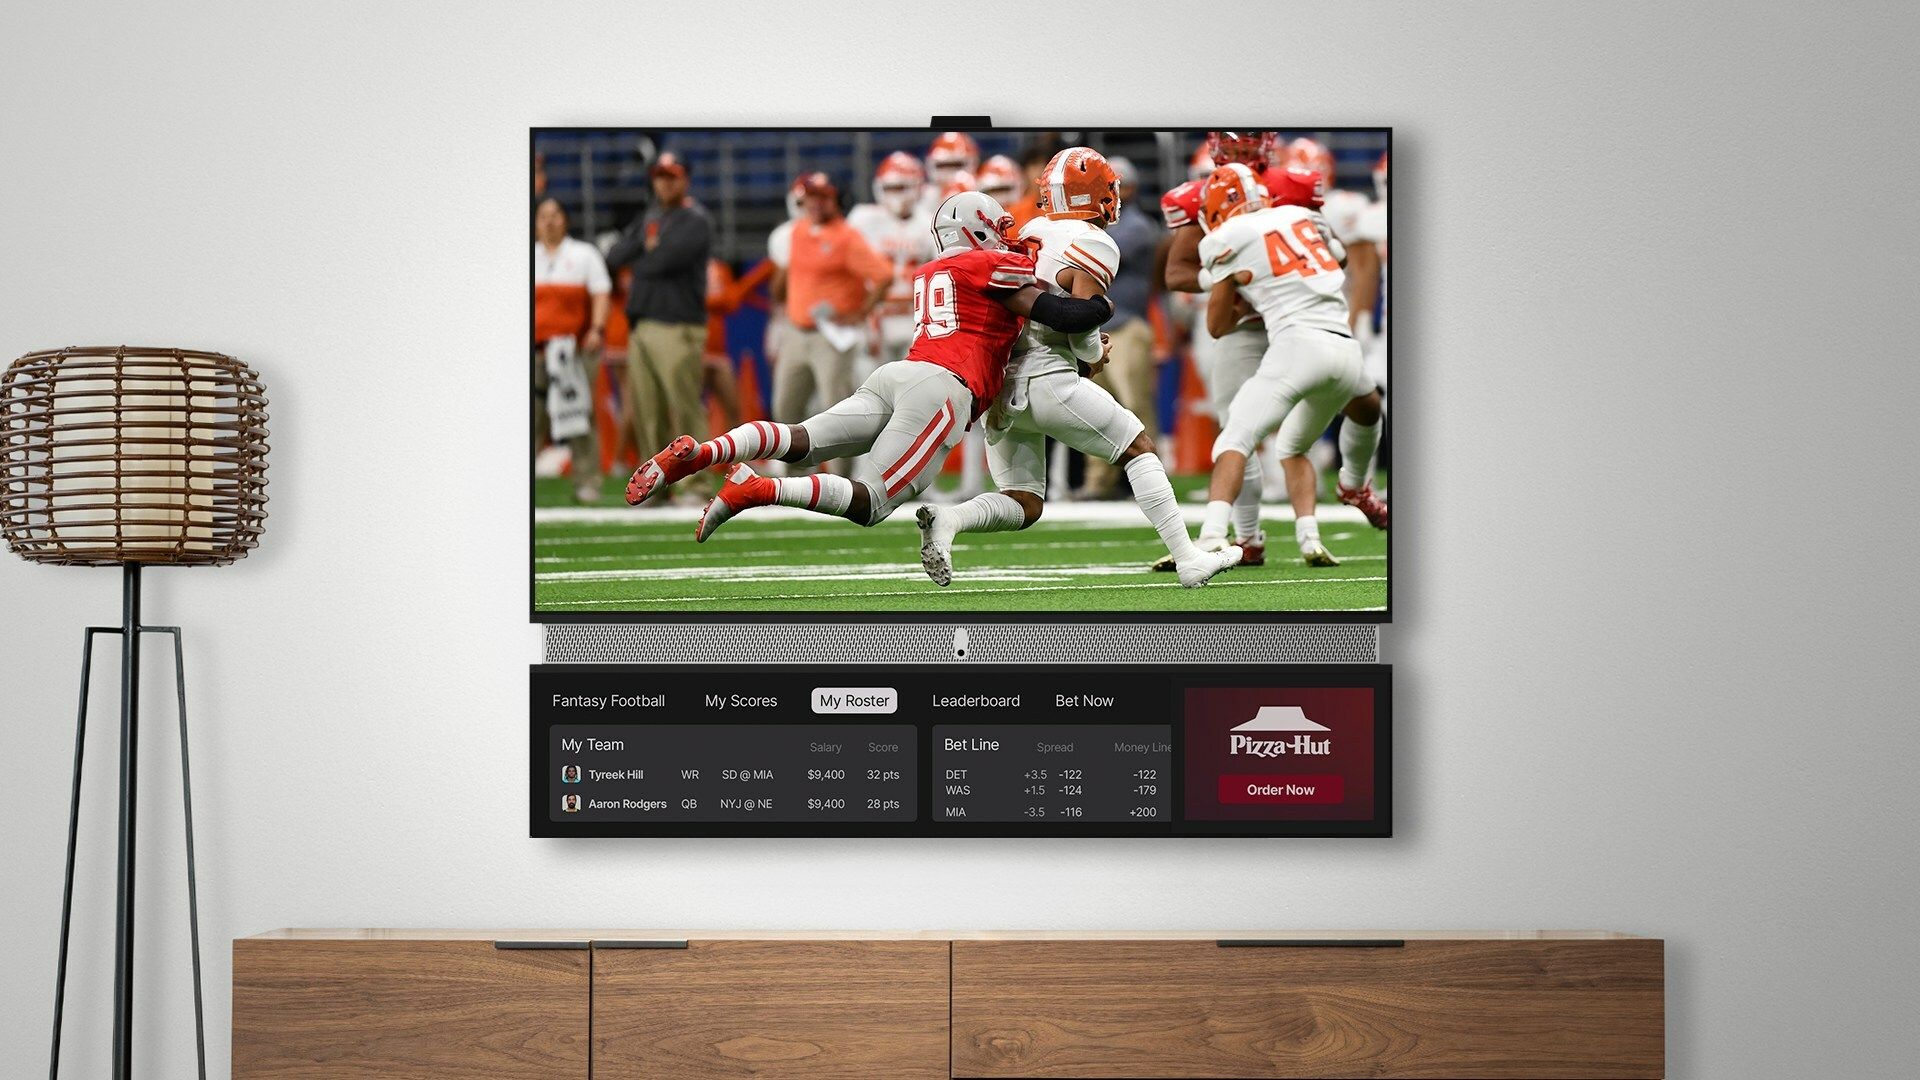 Telly TV with a football game